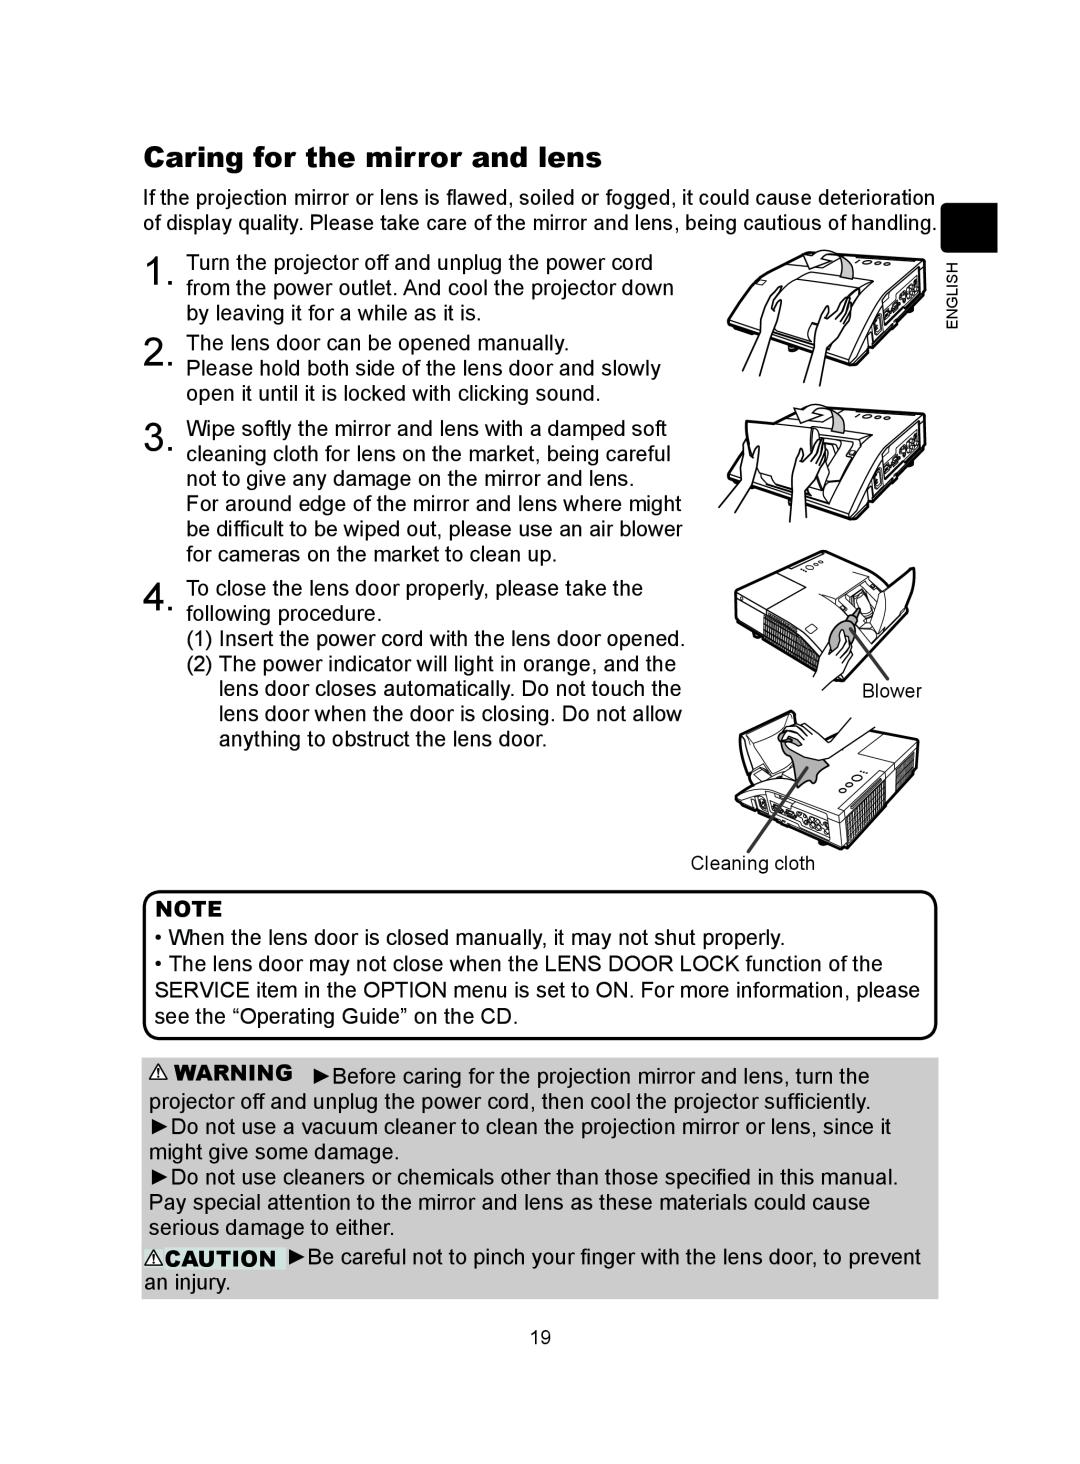 Dukane 8104HW user manual Caring for the mirror and lens 